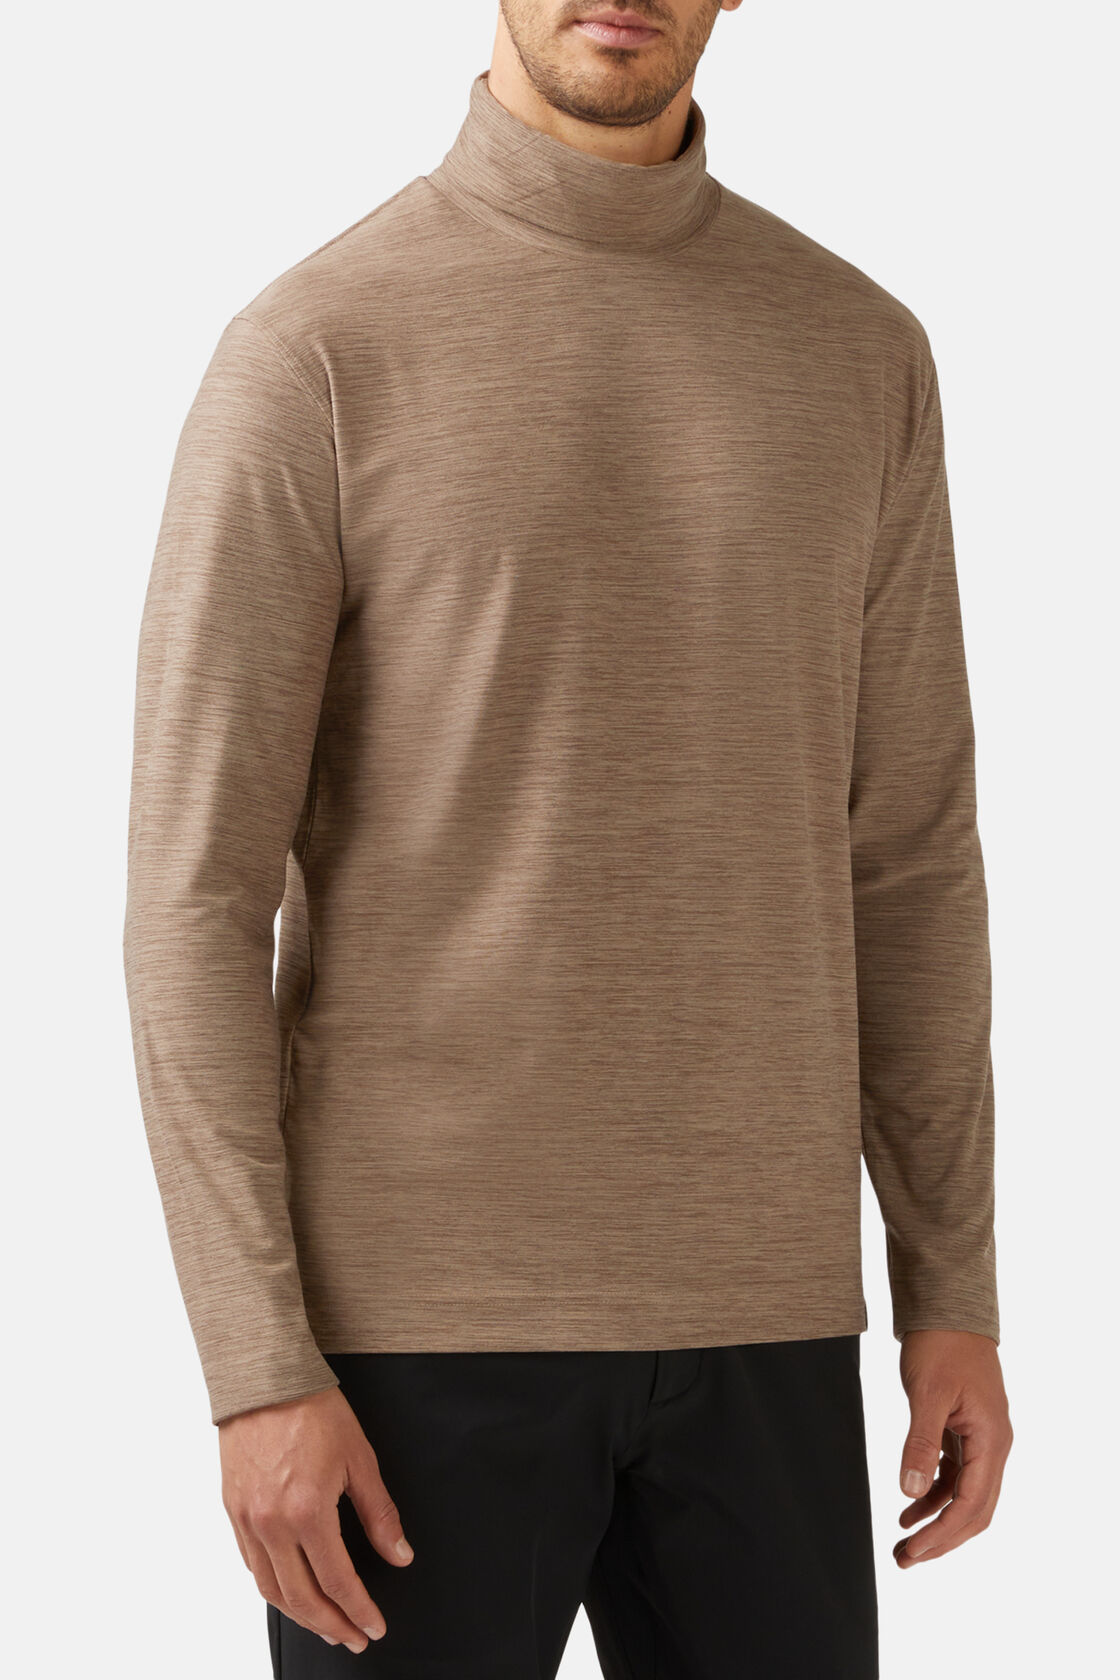 Long-Sleeved High Neck T-Shirt in Technical Fabric, , hi-res